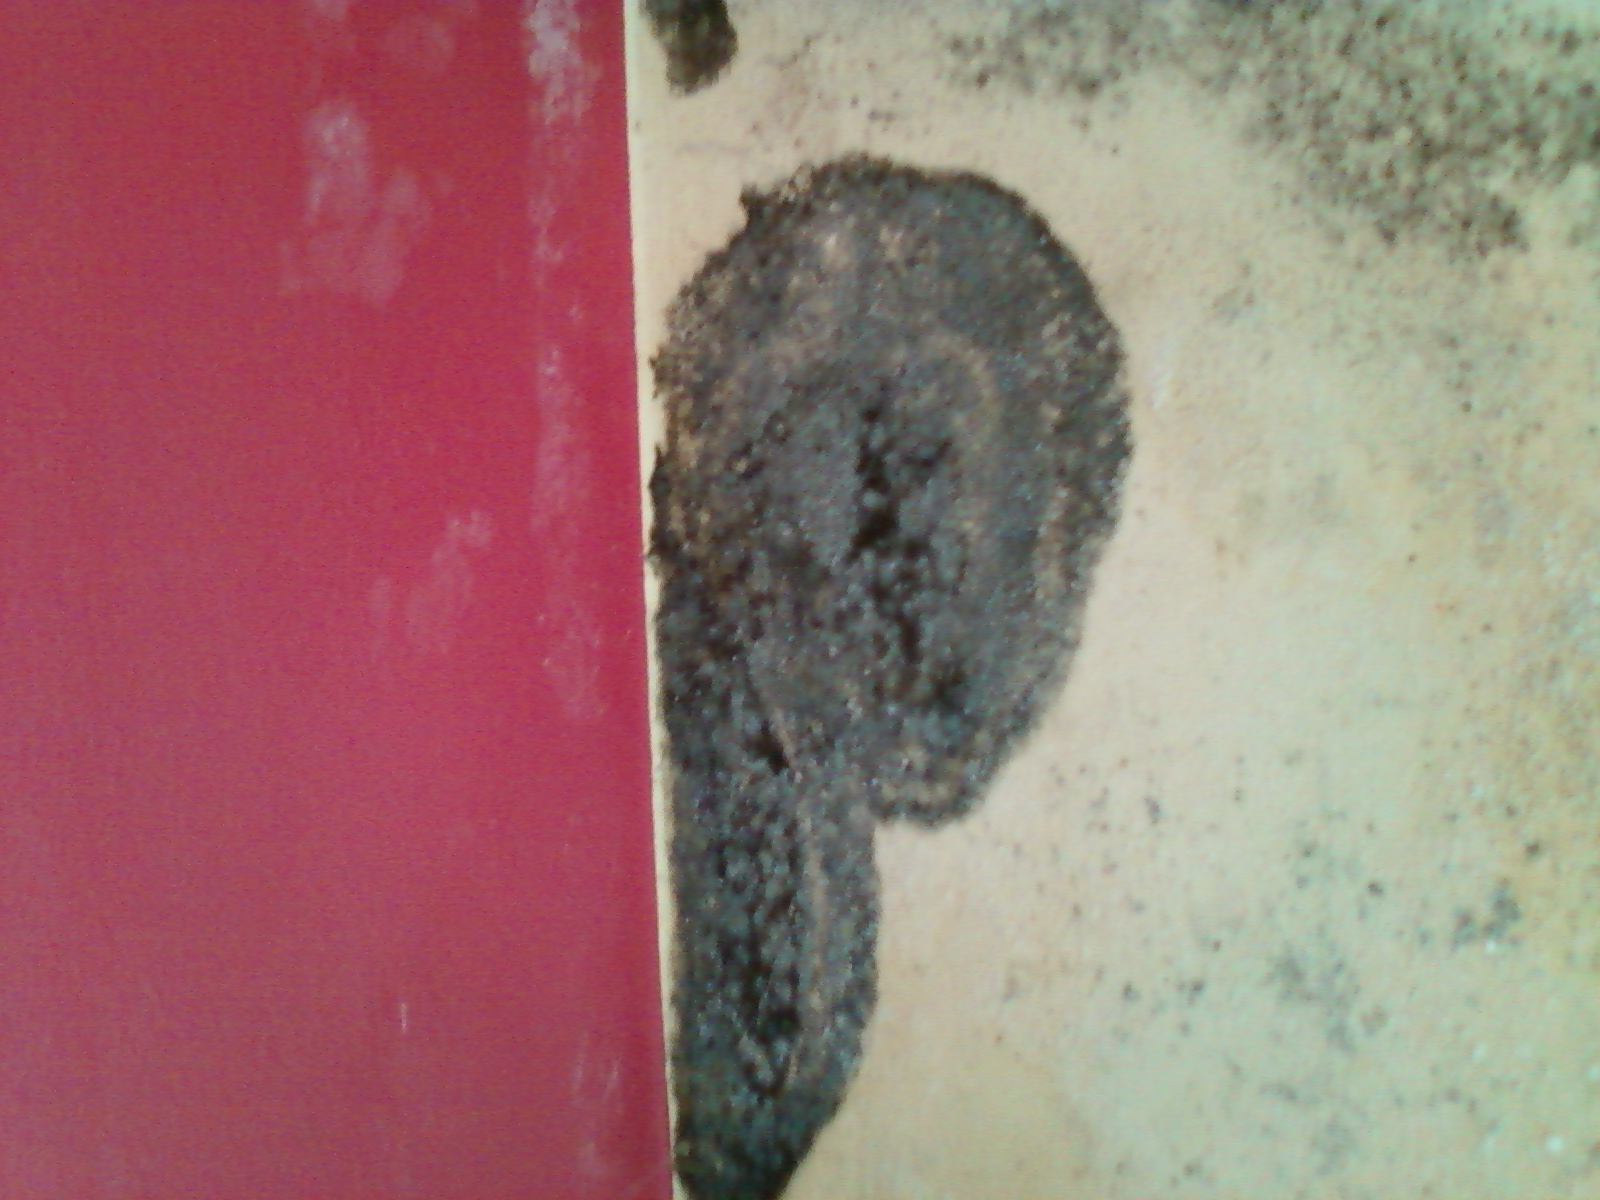 Mould contamination of the wall